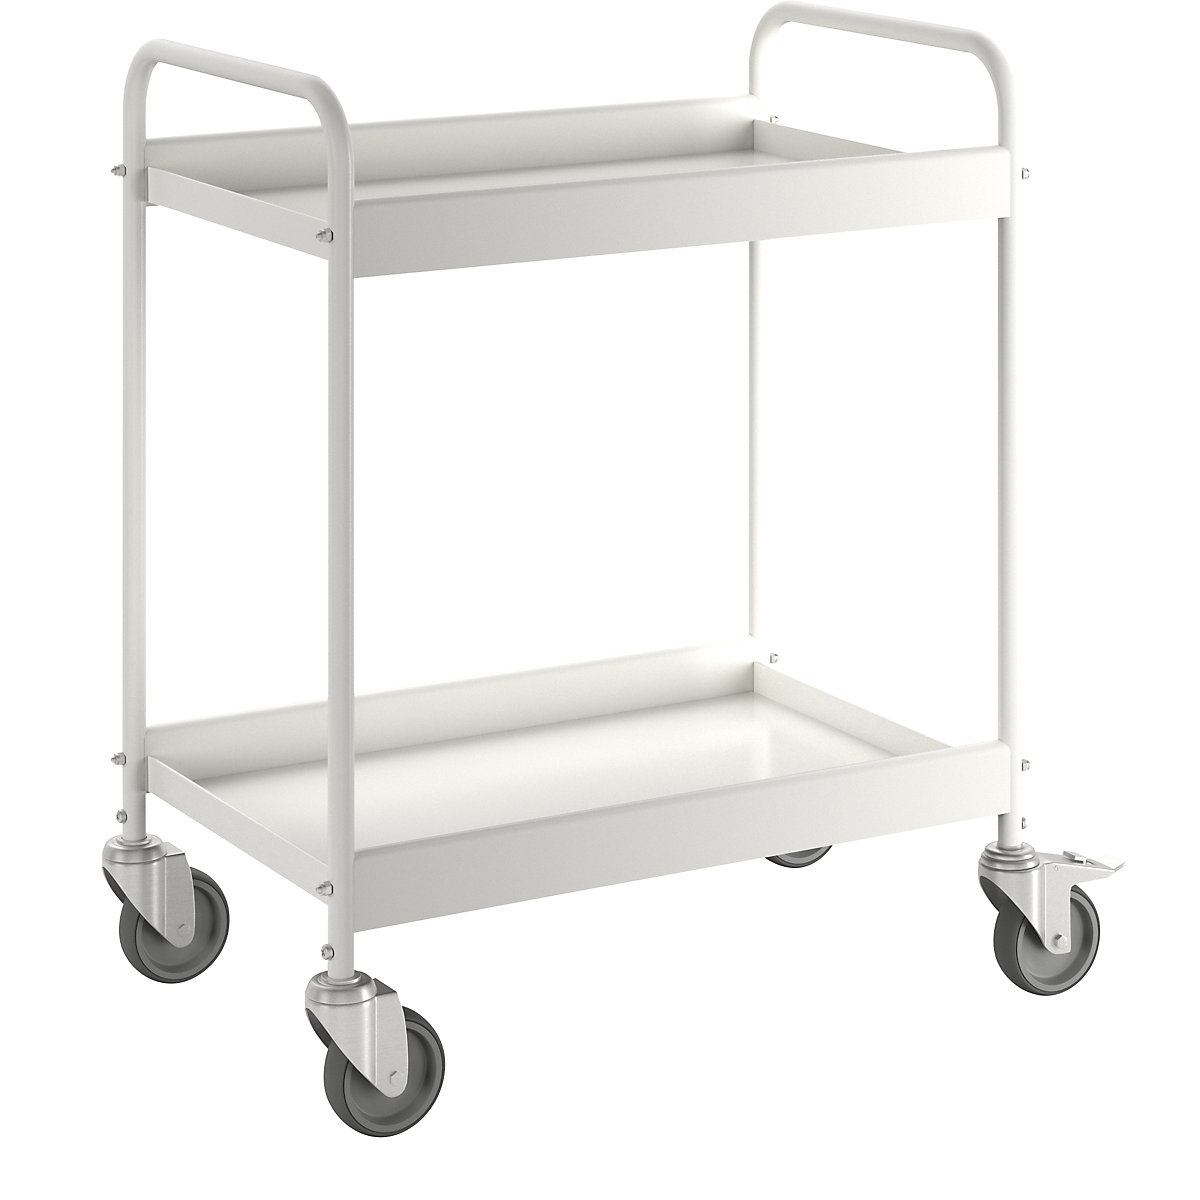 Table trolley, powder coated tubular steel, max. load 40 kg, 2 shelves, pure white RAL 9010, 4 swivel castors, 2 with double stops-3